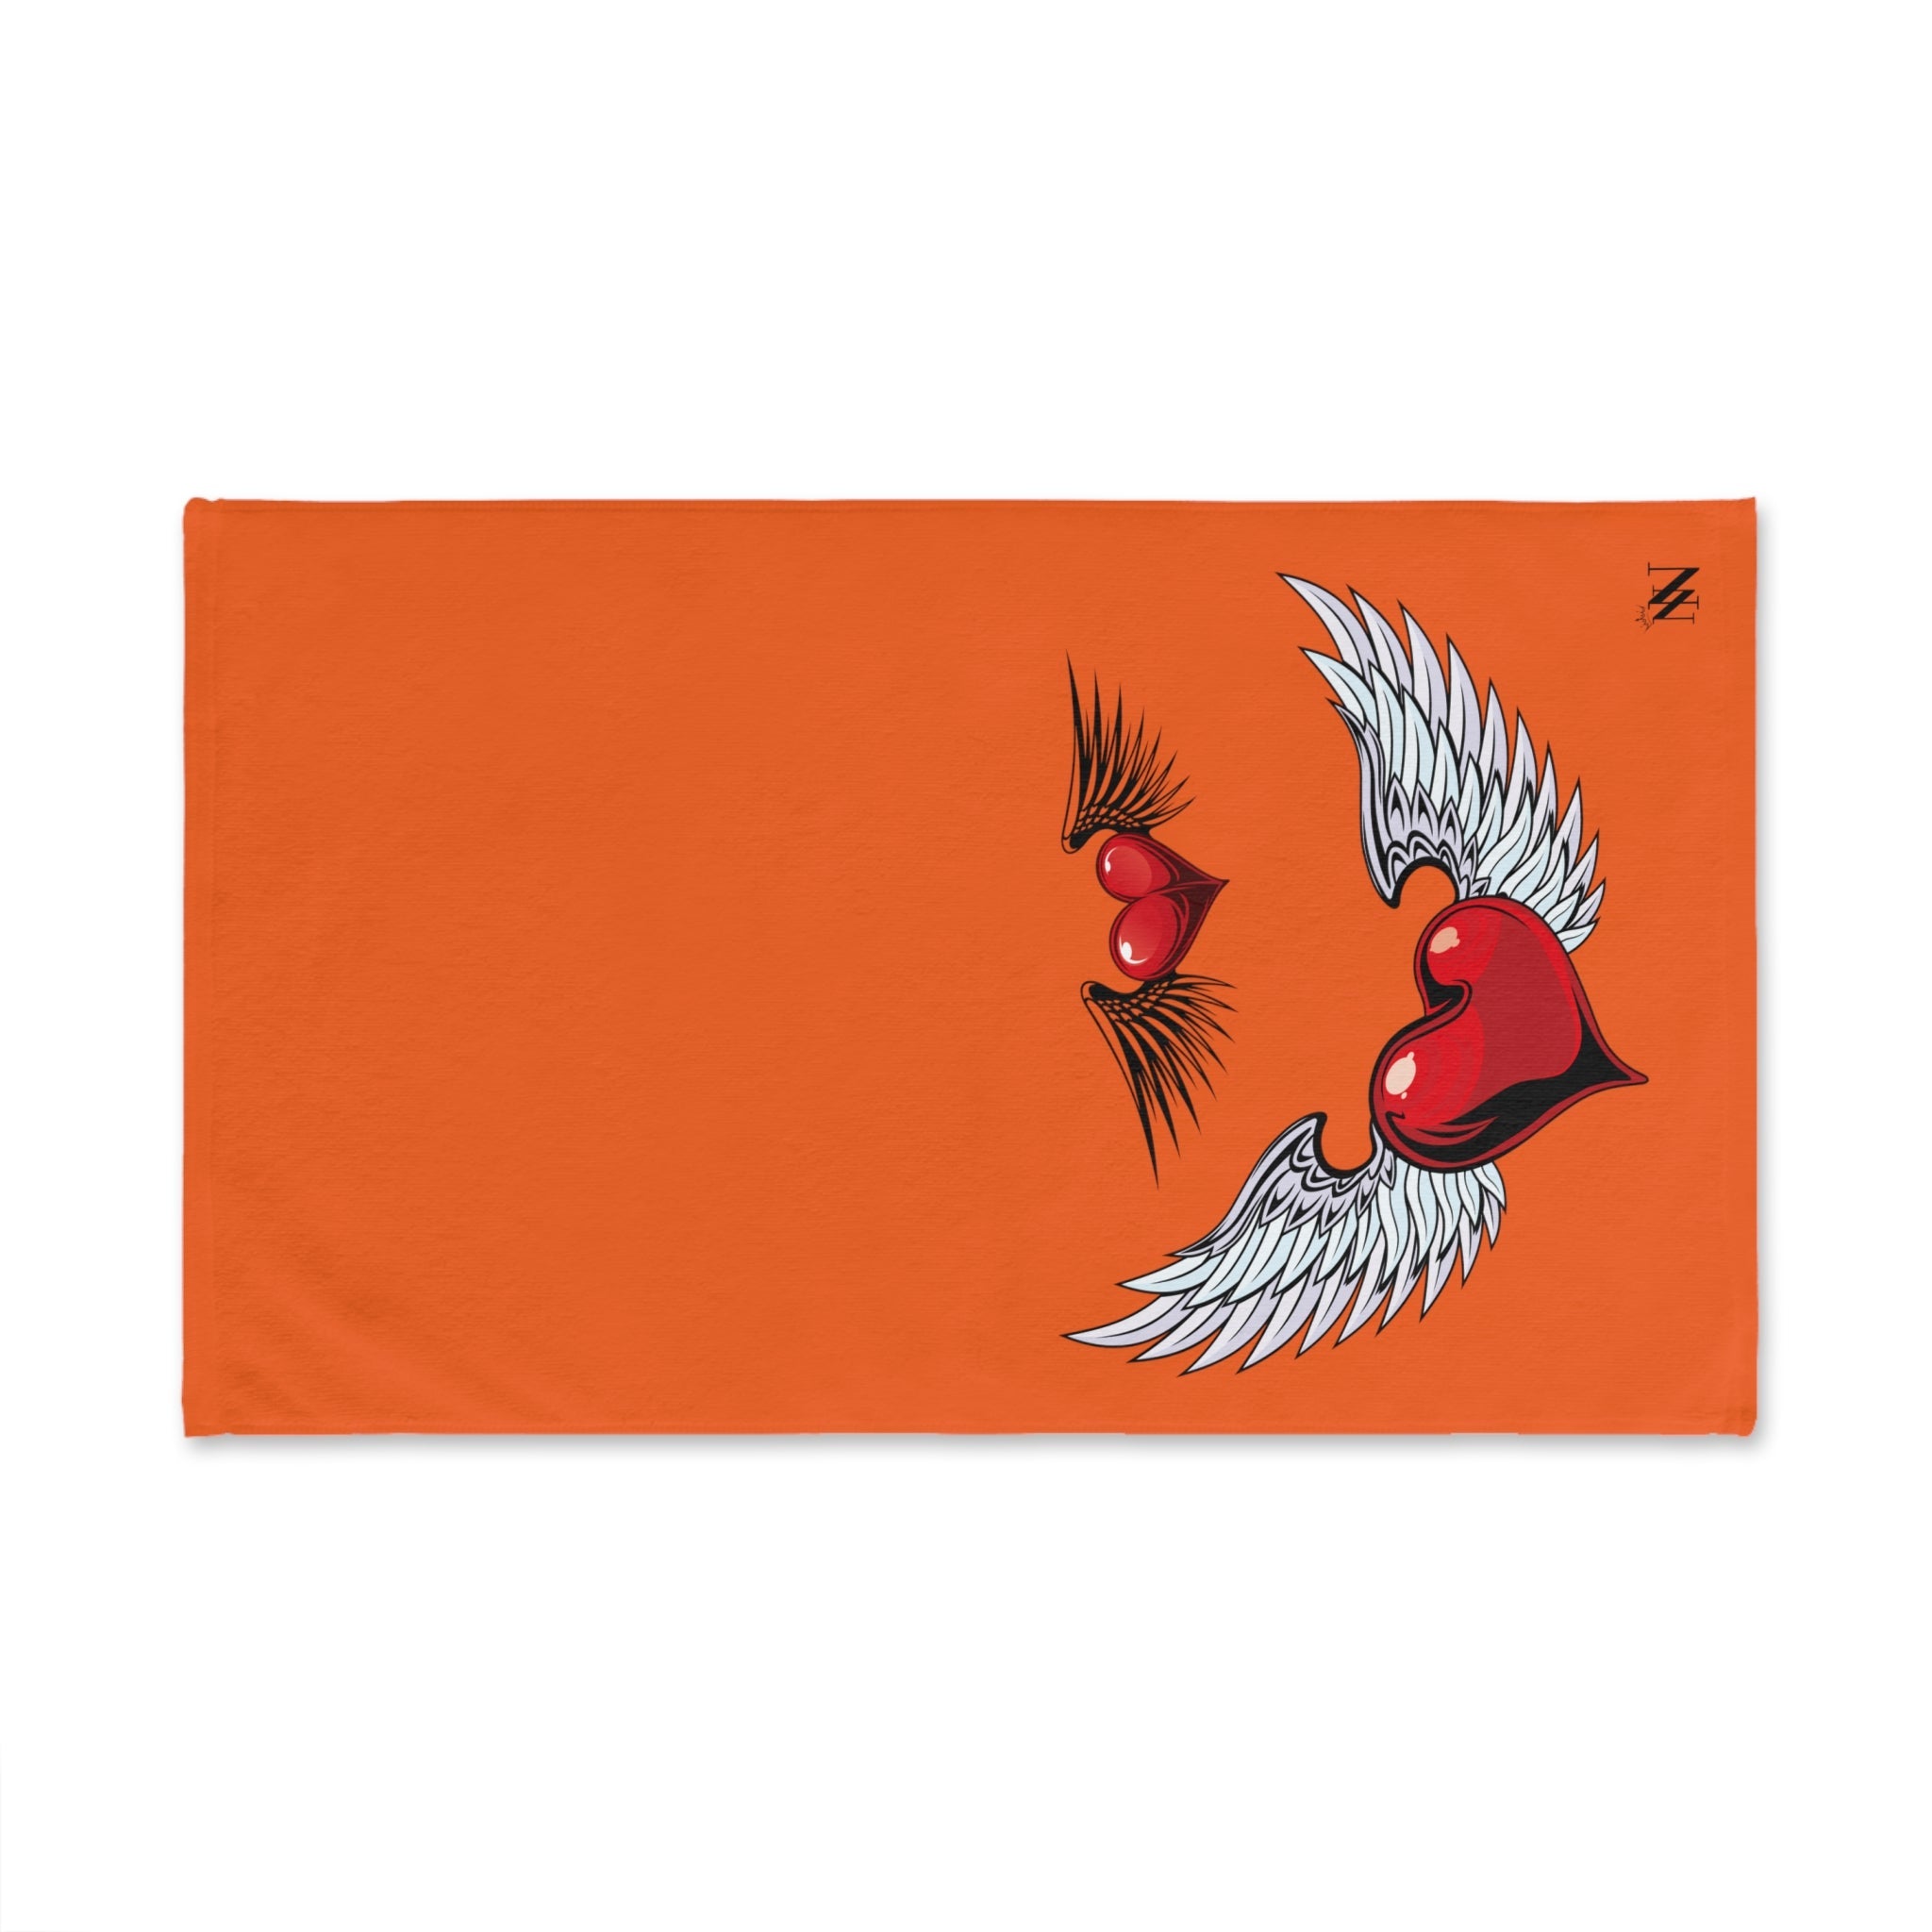 Twin Wing Heart Orange | Funny Gifts for Men - Gifts for Him - Birthday Gifts for Men, Him, Husband, Boyfriend, New Couple Gifts, Fathers & Valentines Day Gifts, Hand Towels NECTAR NAPKINS